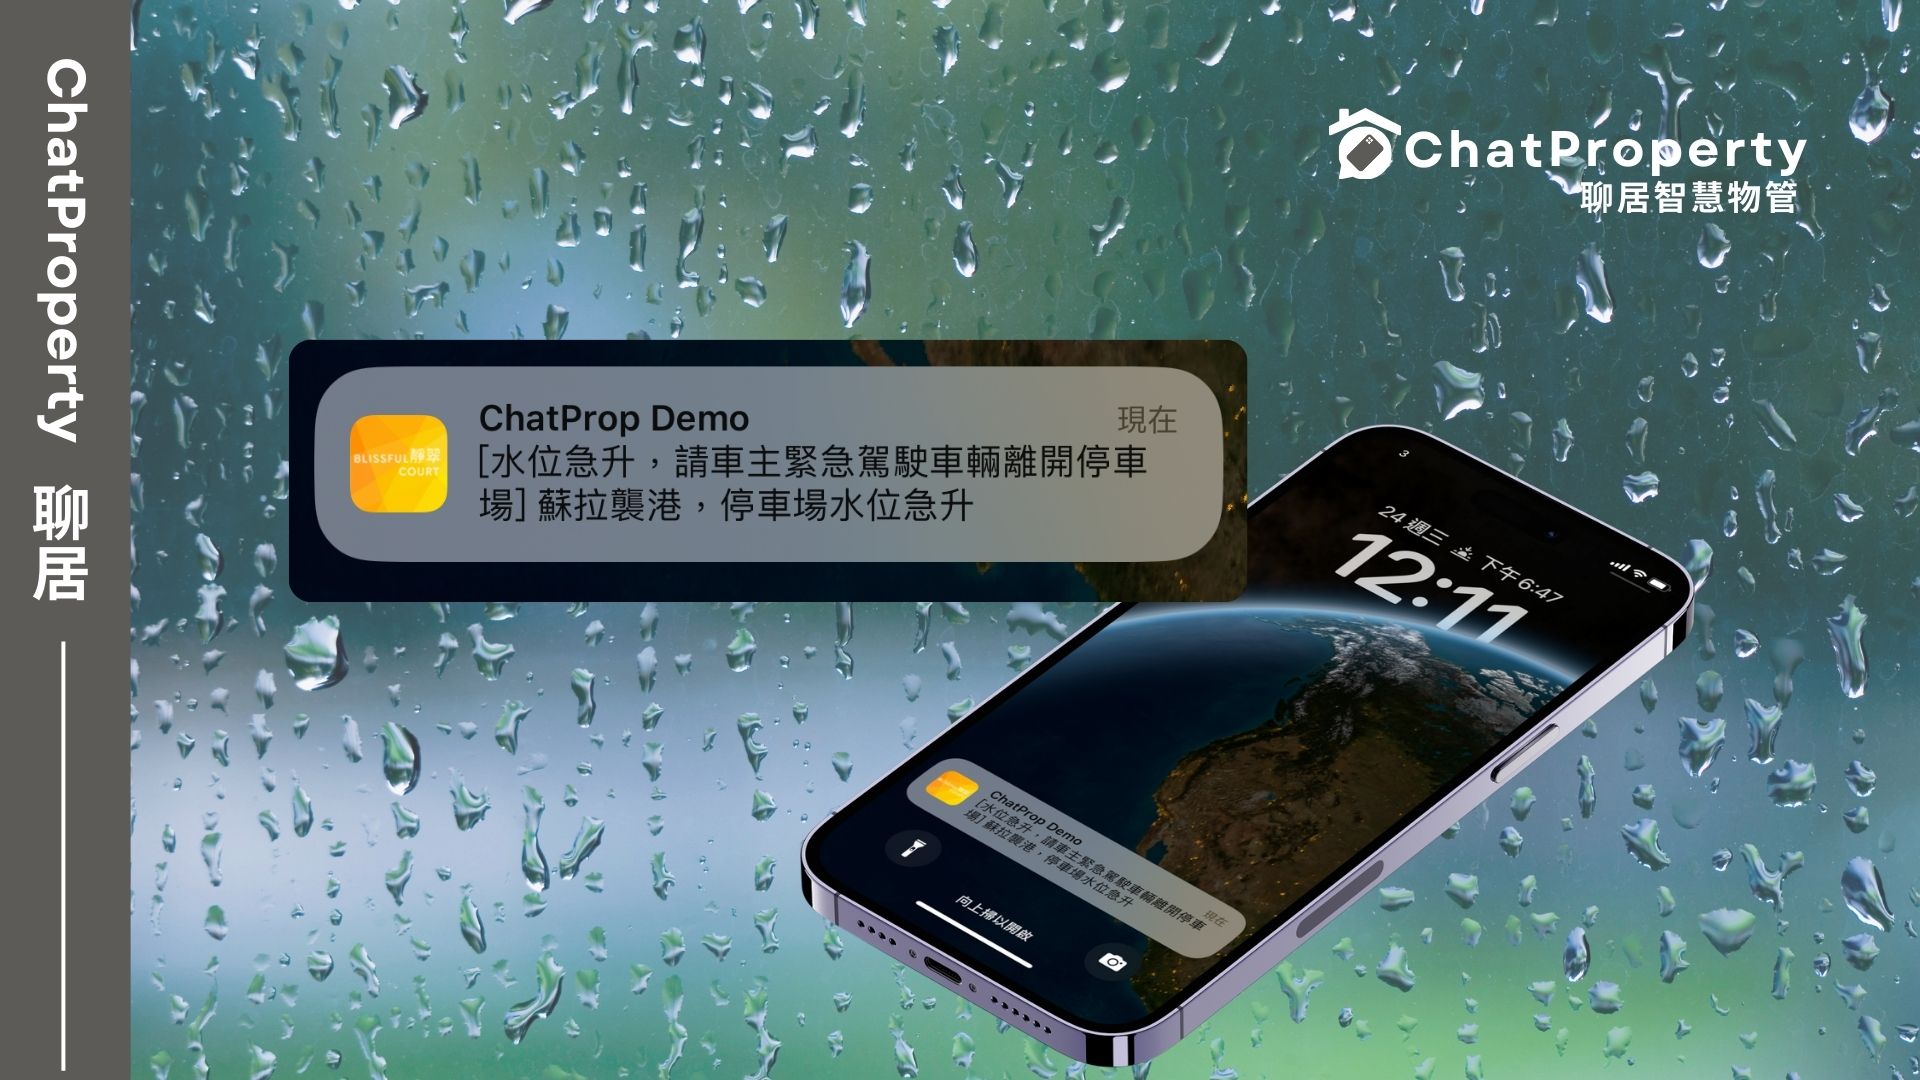 ChatProperty Mobile App for Bad weather